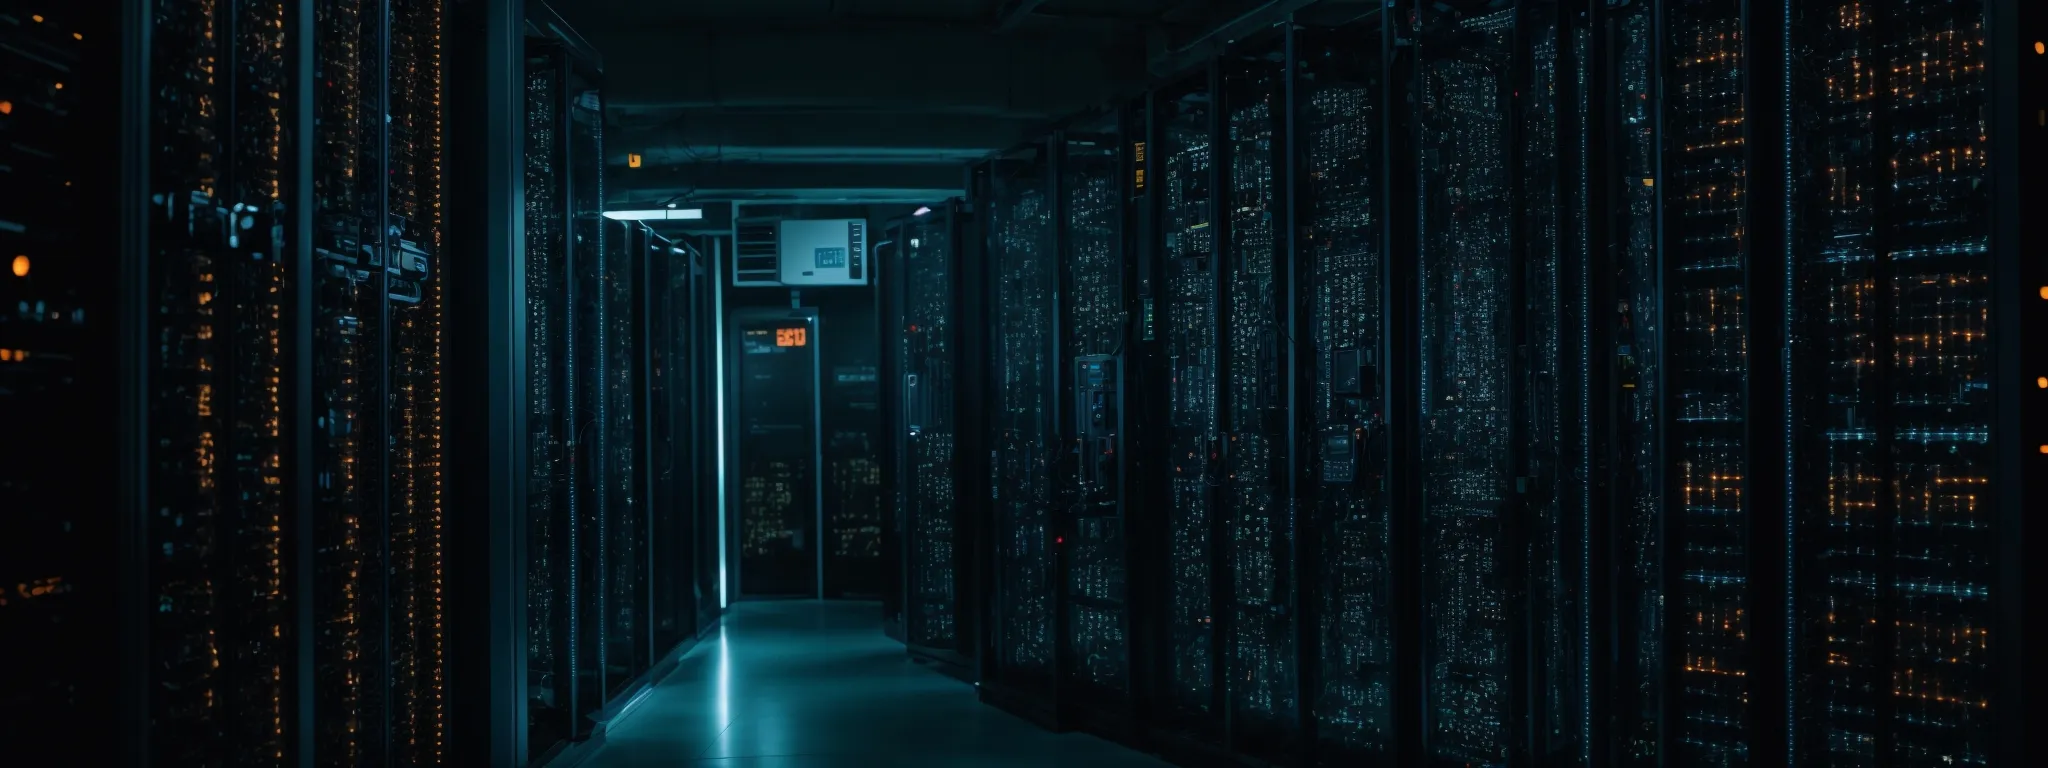 a secure, padlock-encrusted data center with glowing, interconnected servers.